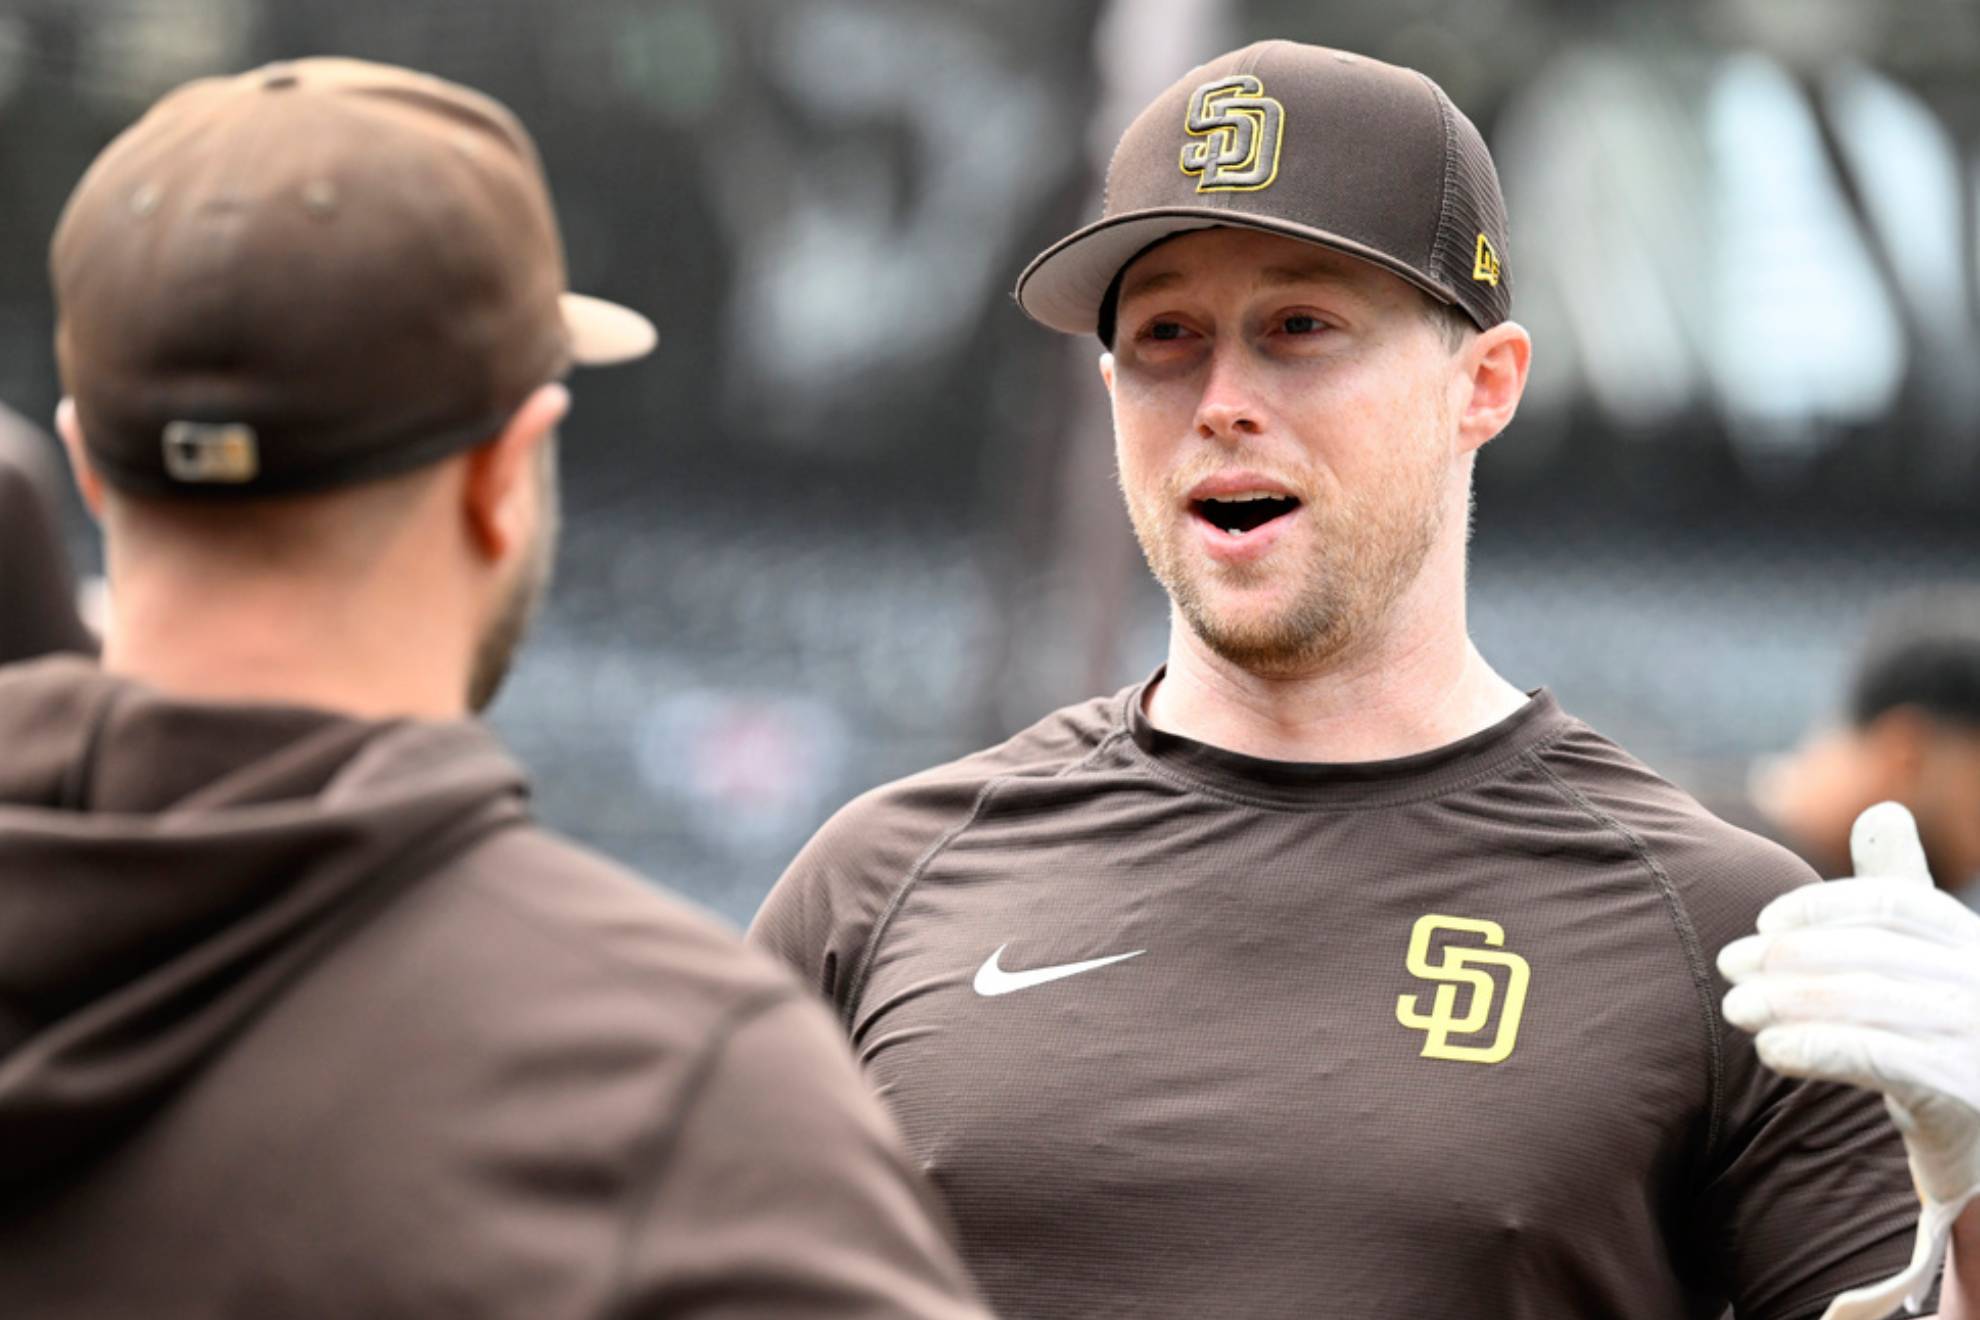 San Diego Padres first baseman Jake Cronenworth, right, talks with a teammate